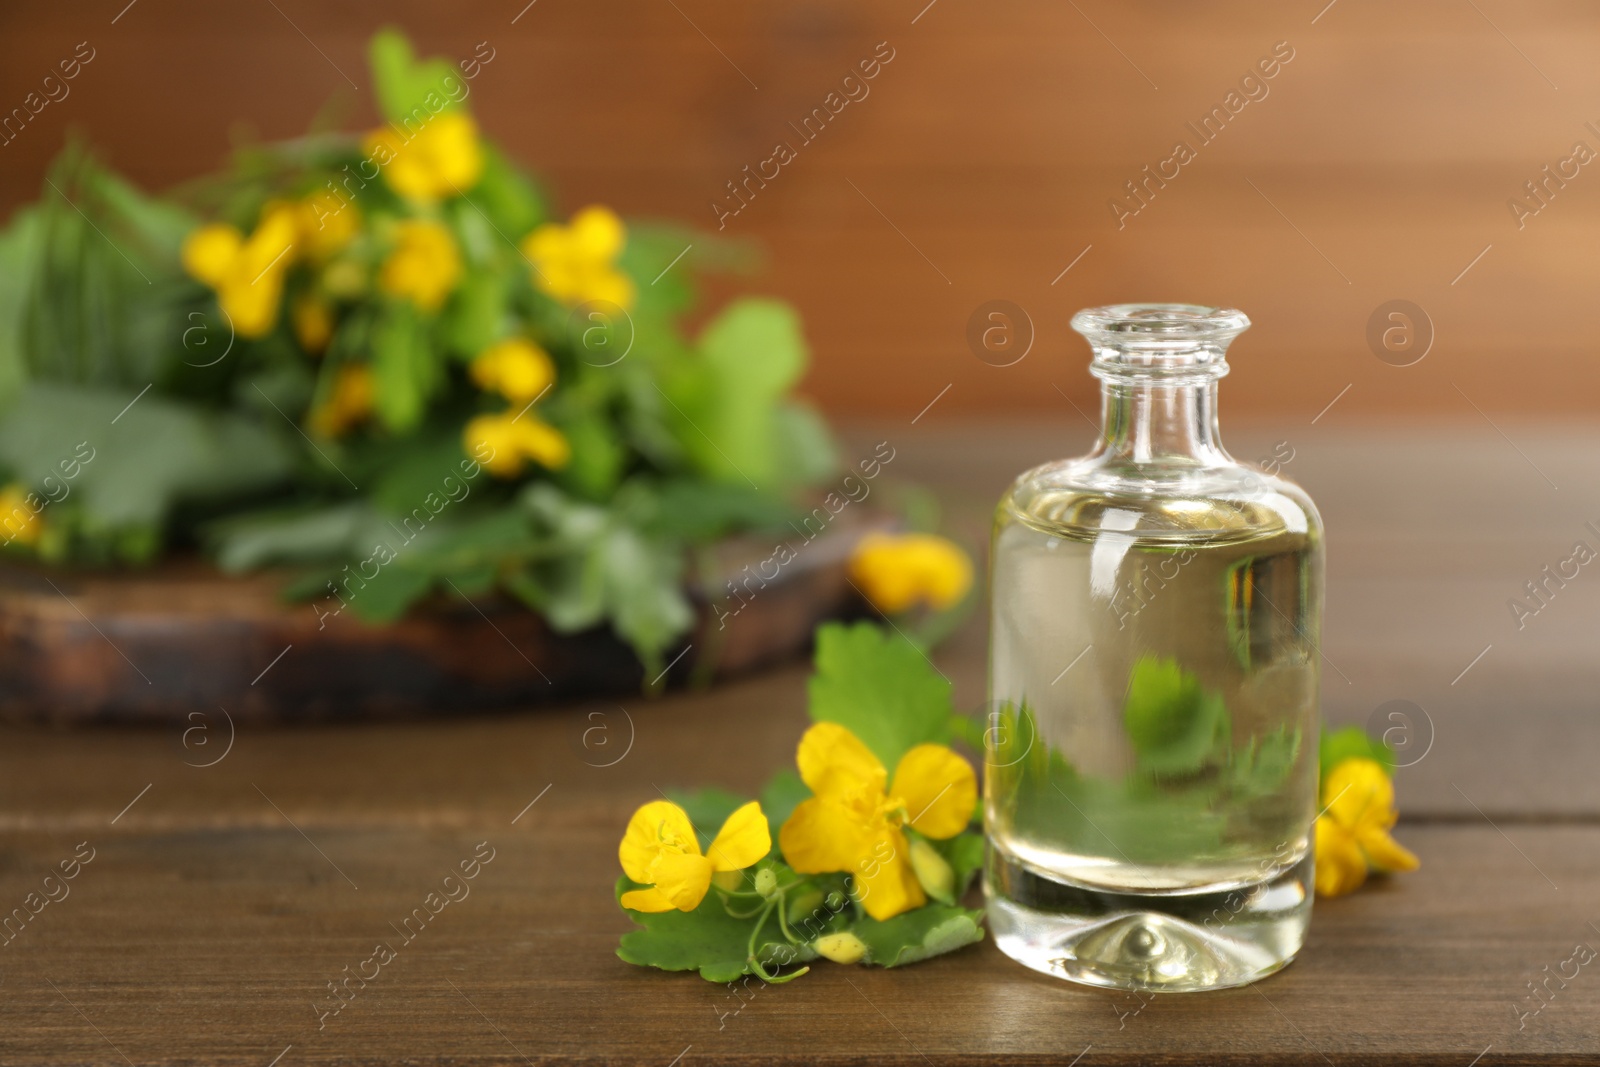 Photo of Bottle of natural celandine oil near flowers on wooden table, space for text